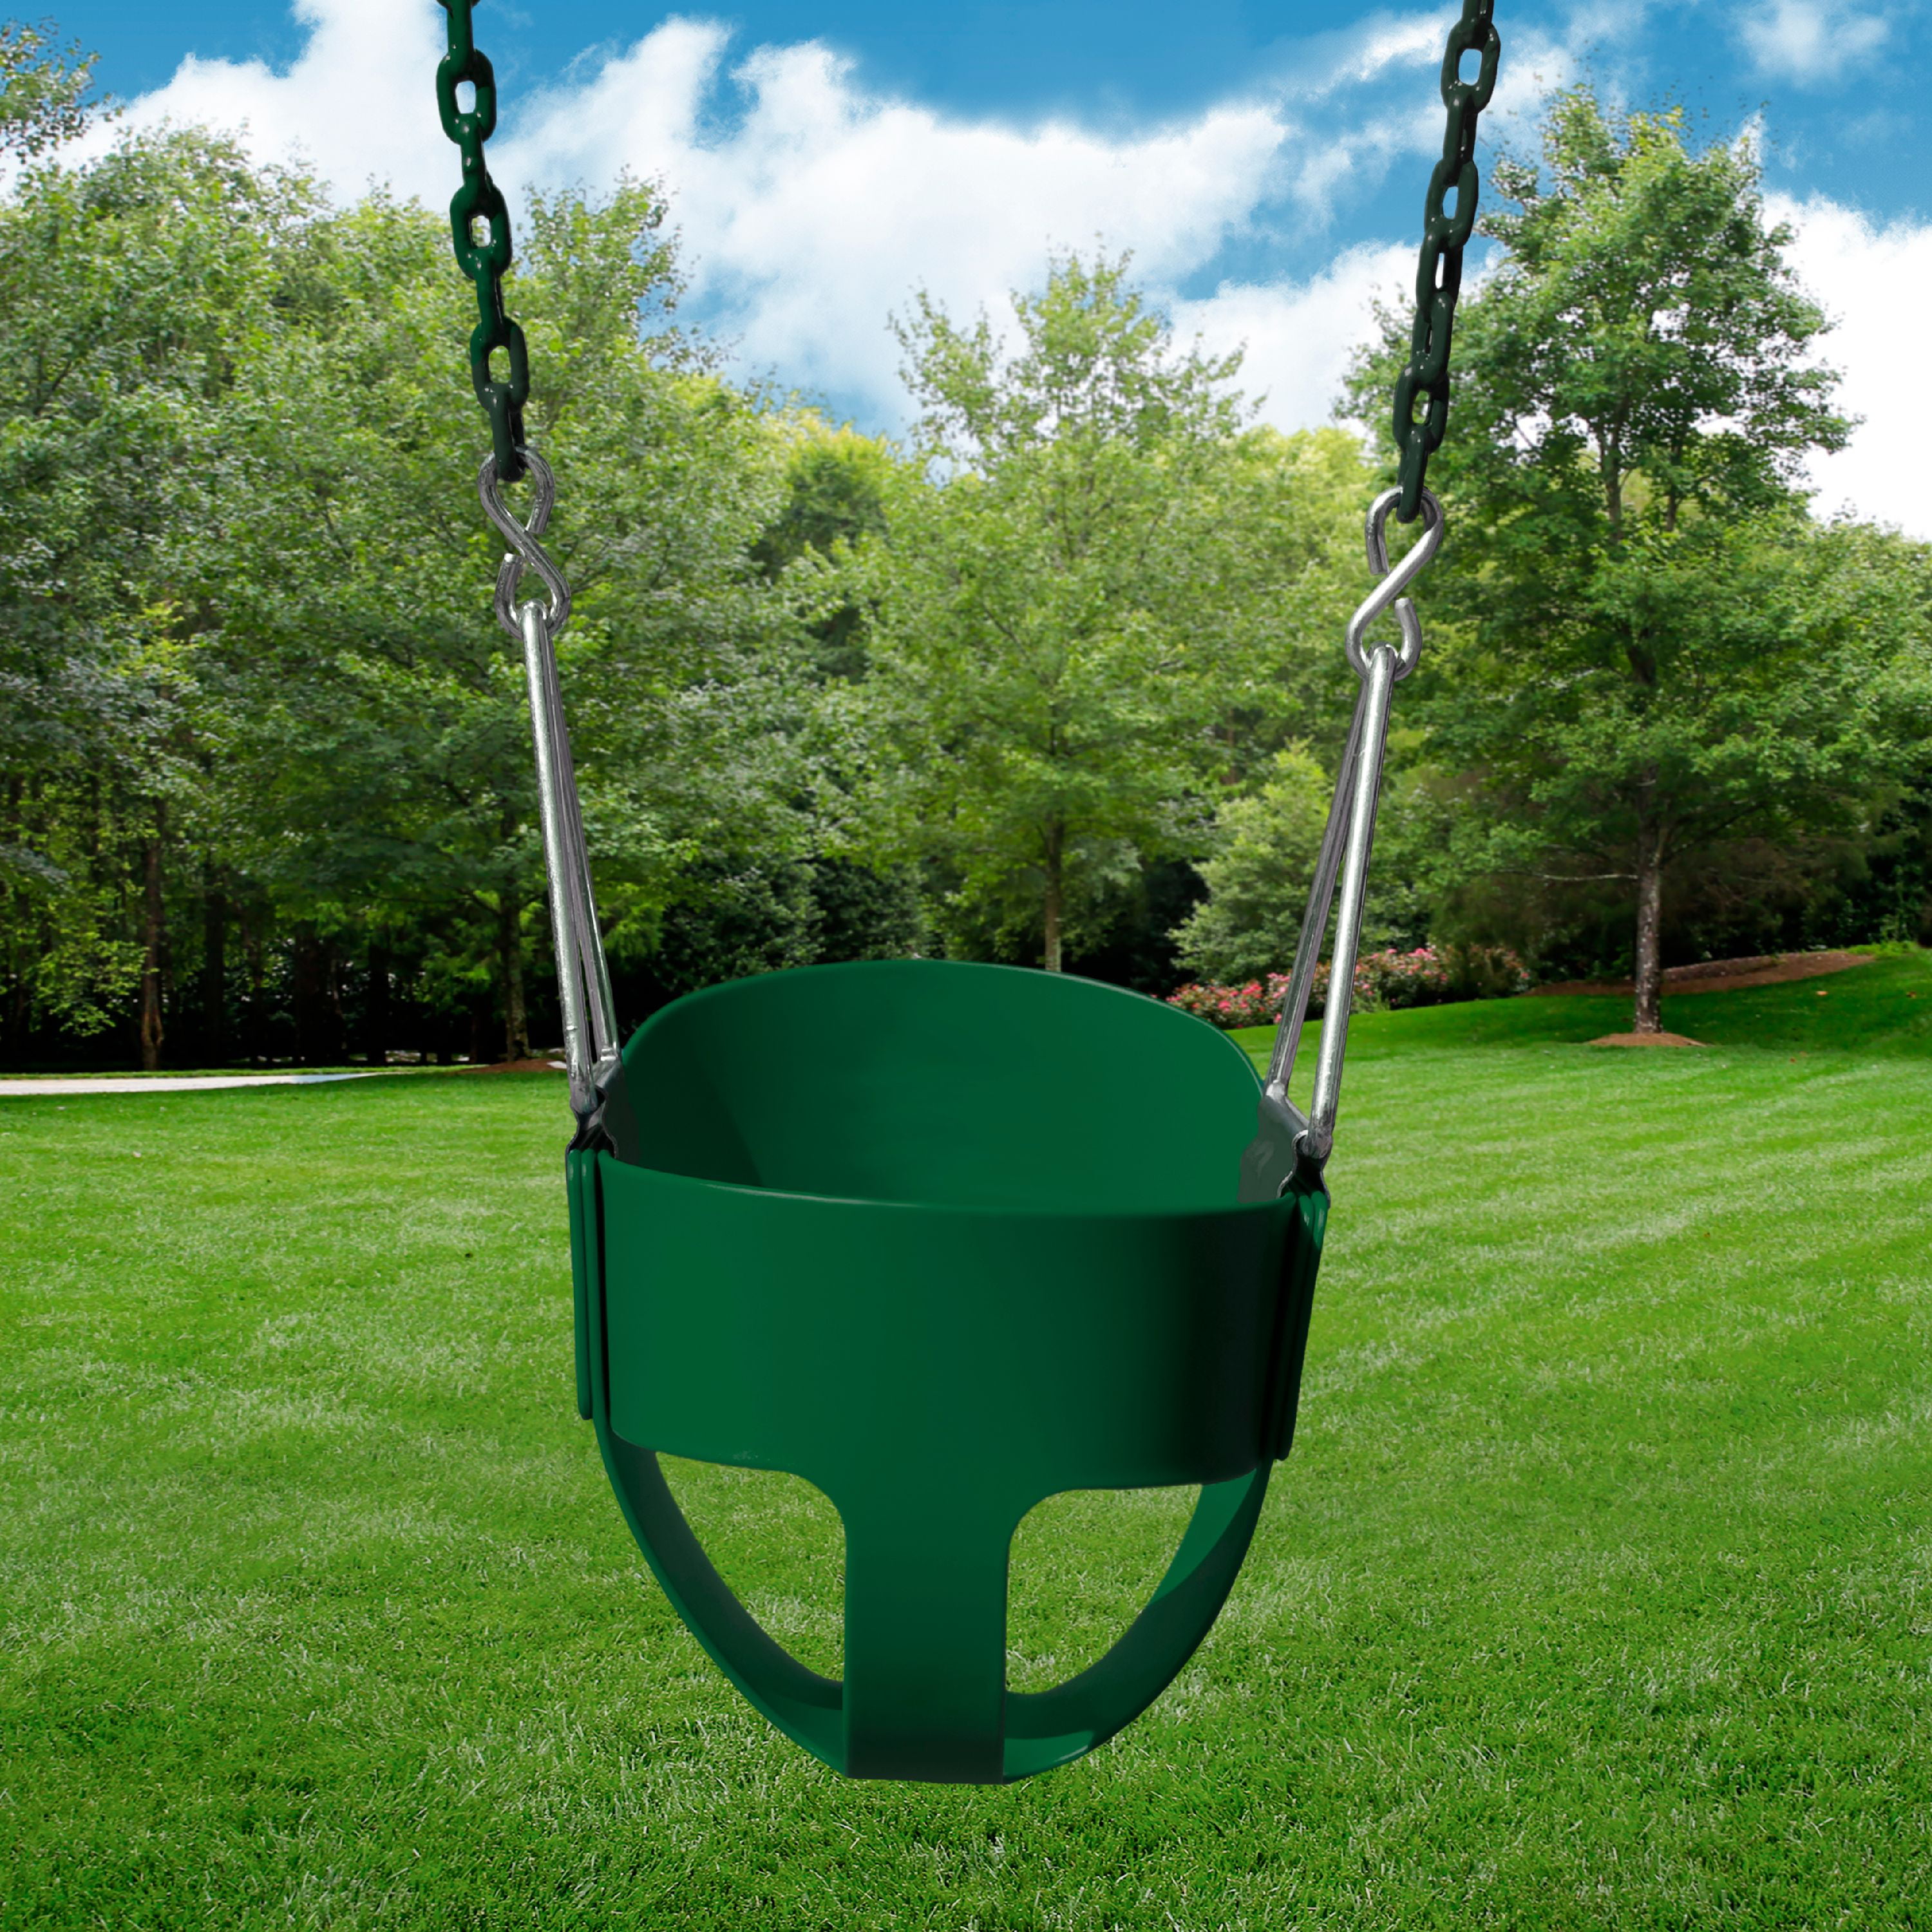 Toddler Kids Red Swing Seat Playsets Children Full Bucket Swing with 58" Chain 